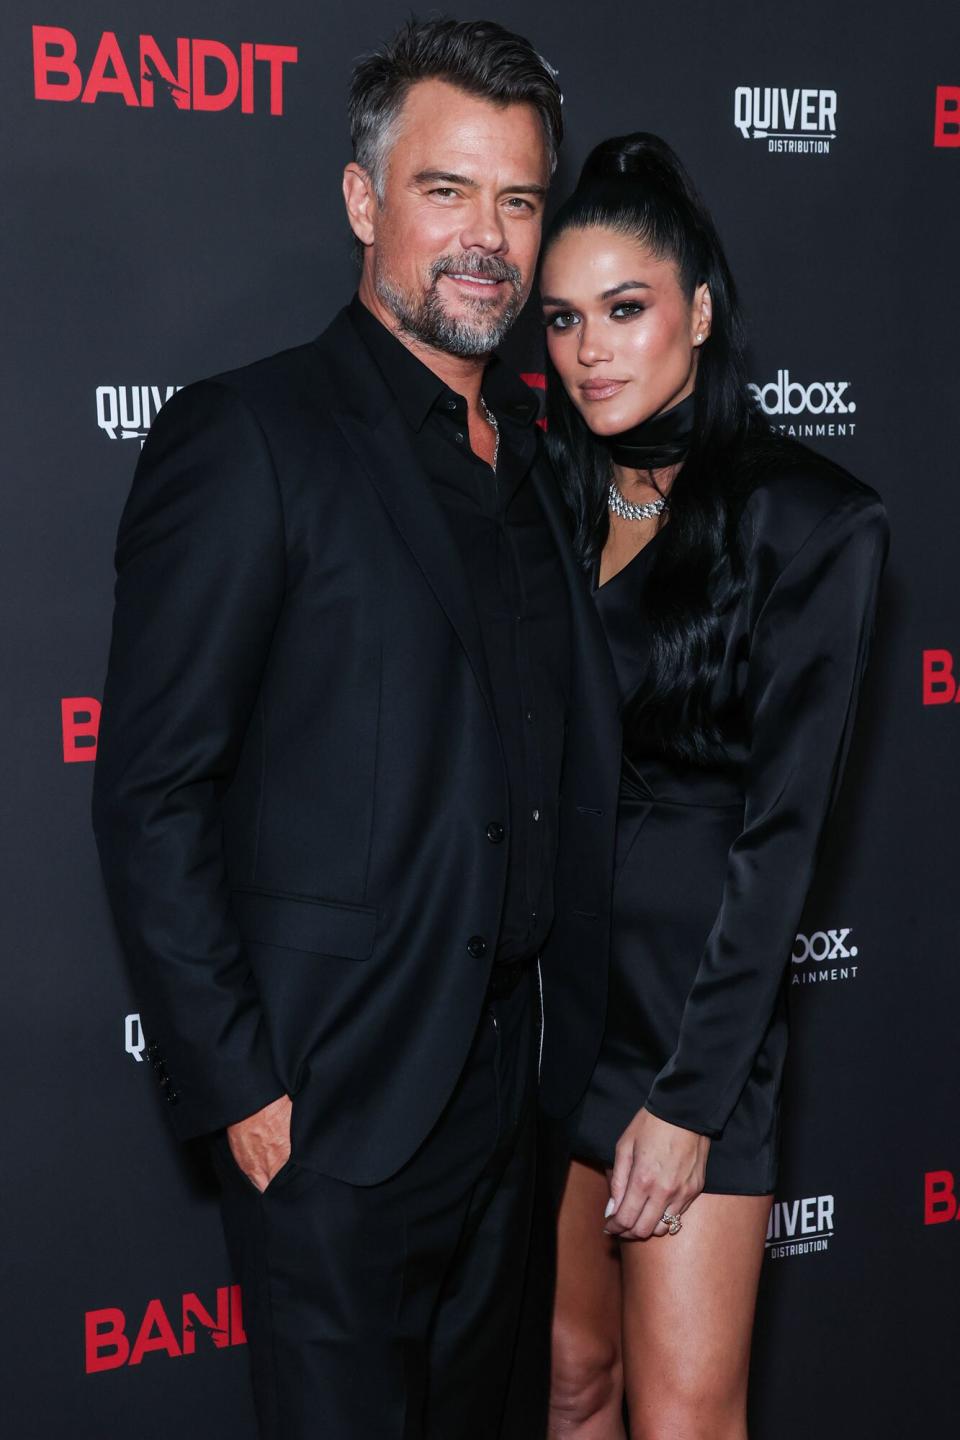 American actor Josh Duhamel and wife/American model, television host and beauty pageant titleholder - Miss World America 2016 Audra Mari arrive at the World Premiere Of Redbox Entertainment and Quiver Distribution's 'Bandit' held at the Harmony Gold Theater on September 21, 2022 in Los Angeles, California, United States. World Premiere Of Redbox Entertainment and Quiver Distribution's 'Bandit', Harmony Gold Theater, Los Angeles, California, United States - 21 Sep 2022